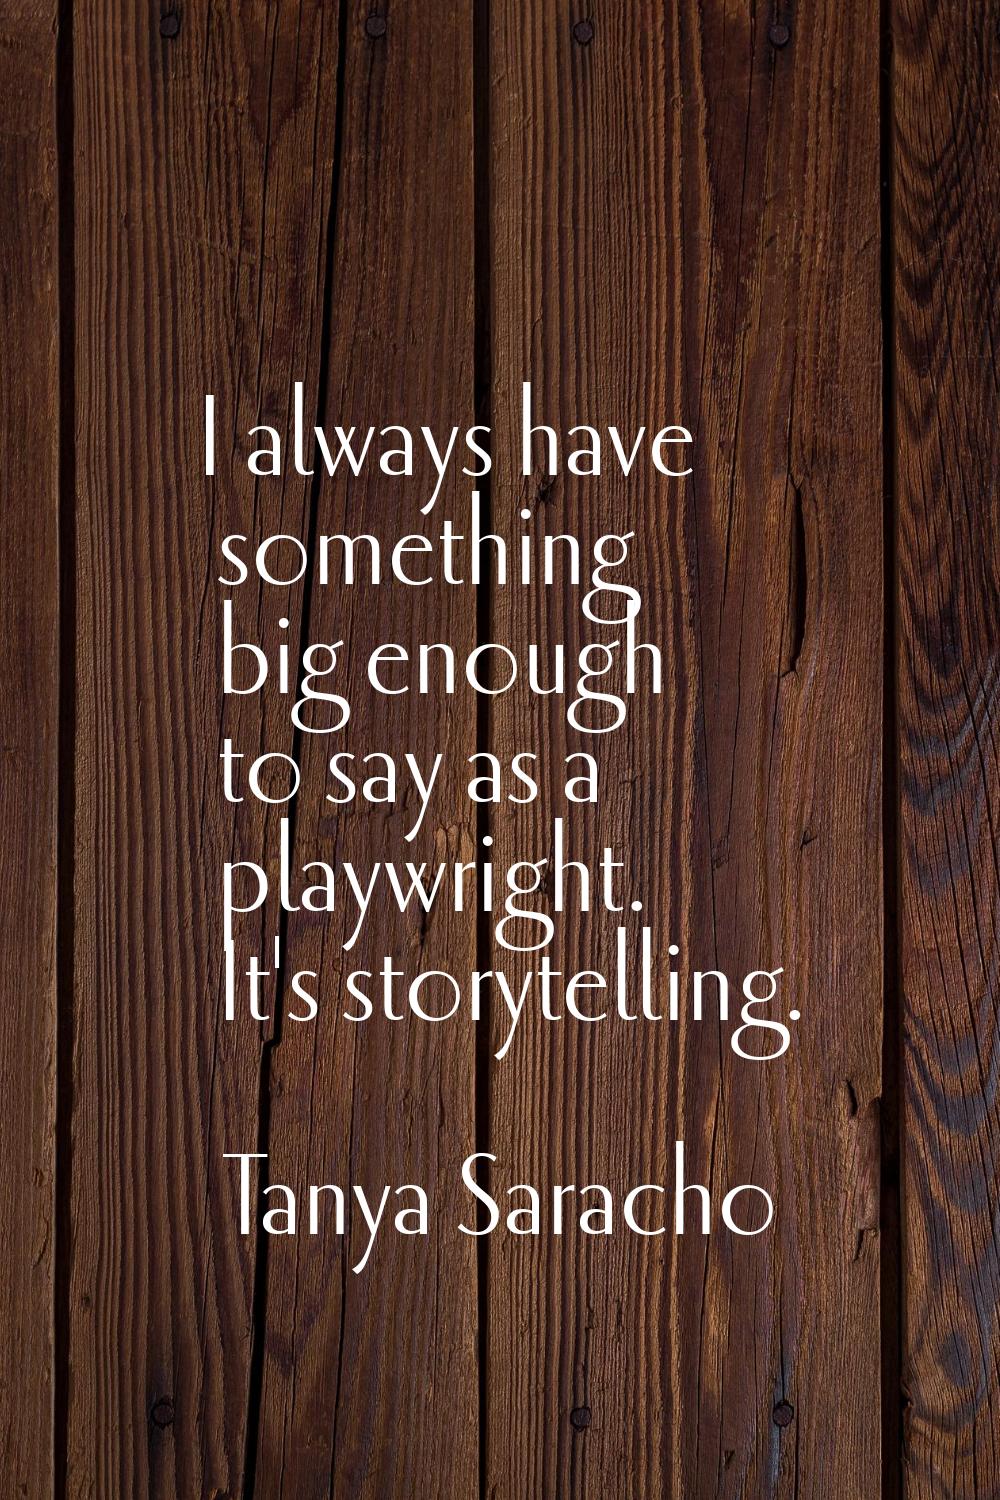 I always have something big enough to say as a playwright. It's storytelling.